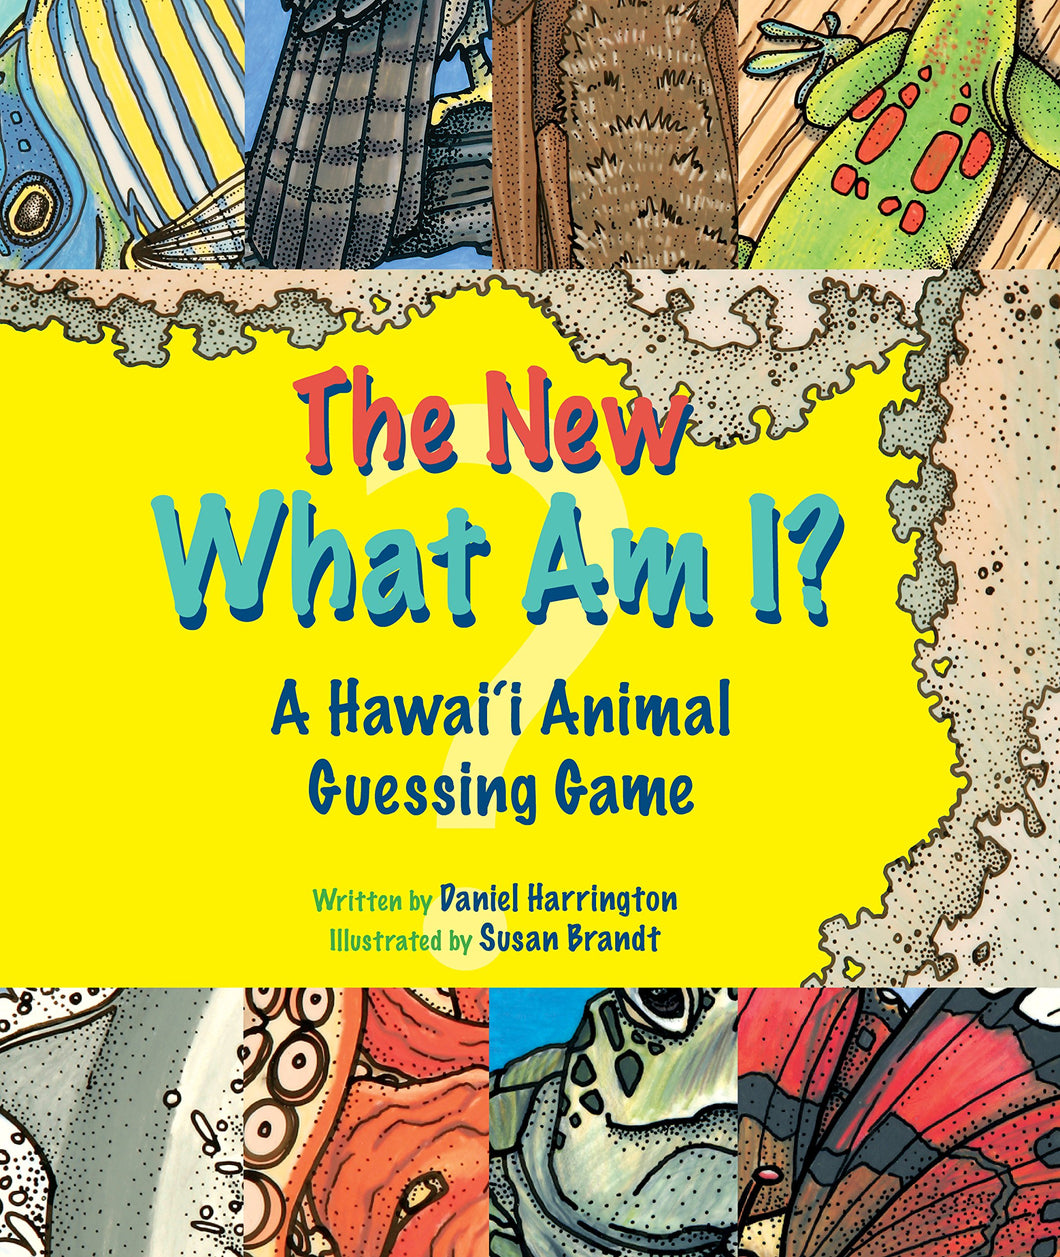 New What Am I? A Hawaii Animal Guessing Game by Daniel Harrington